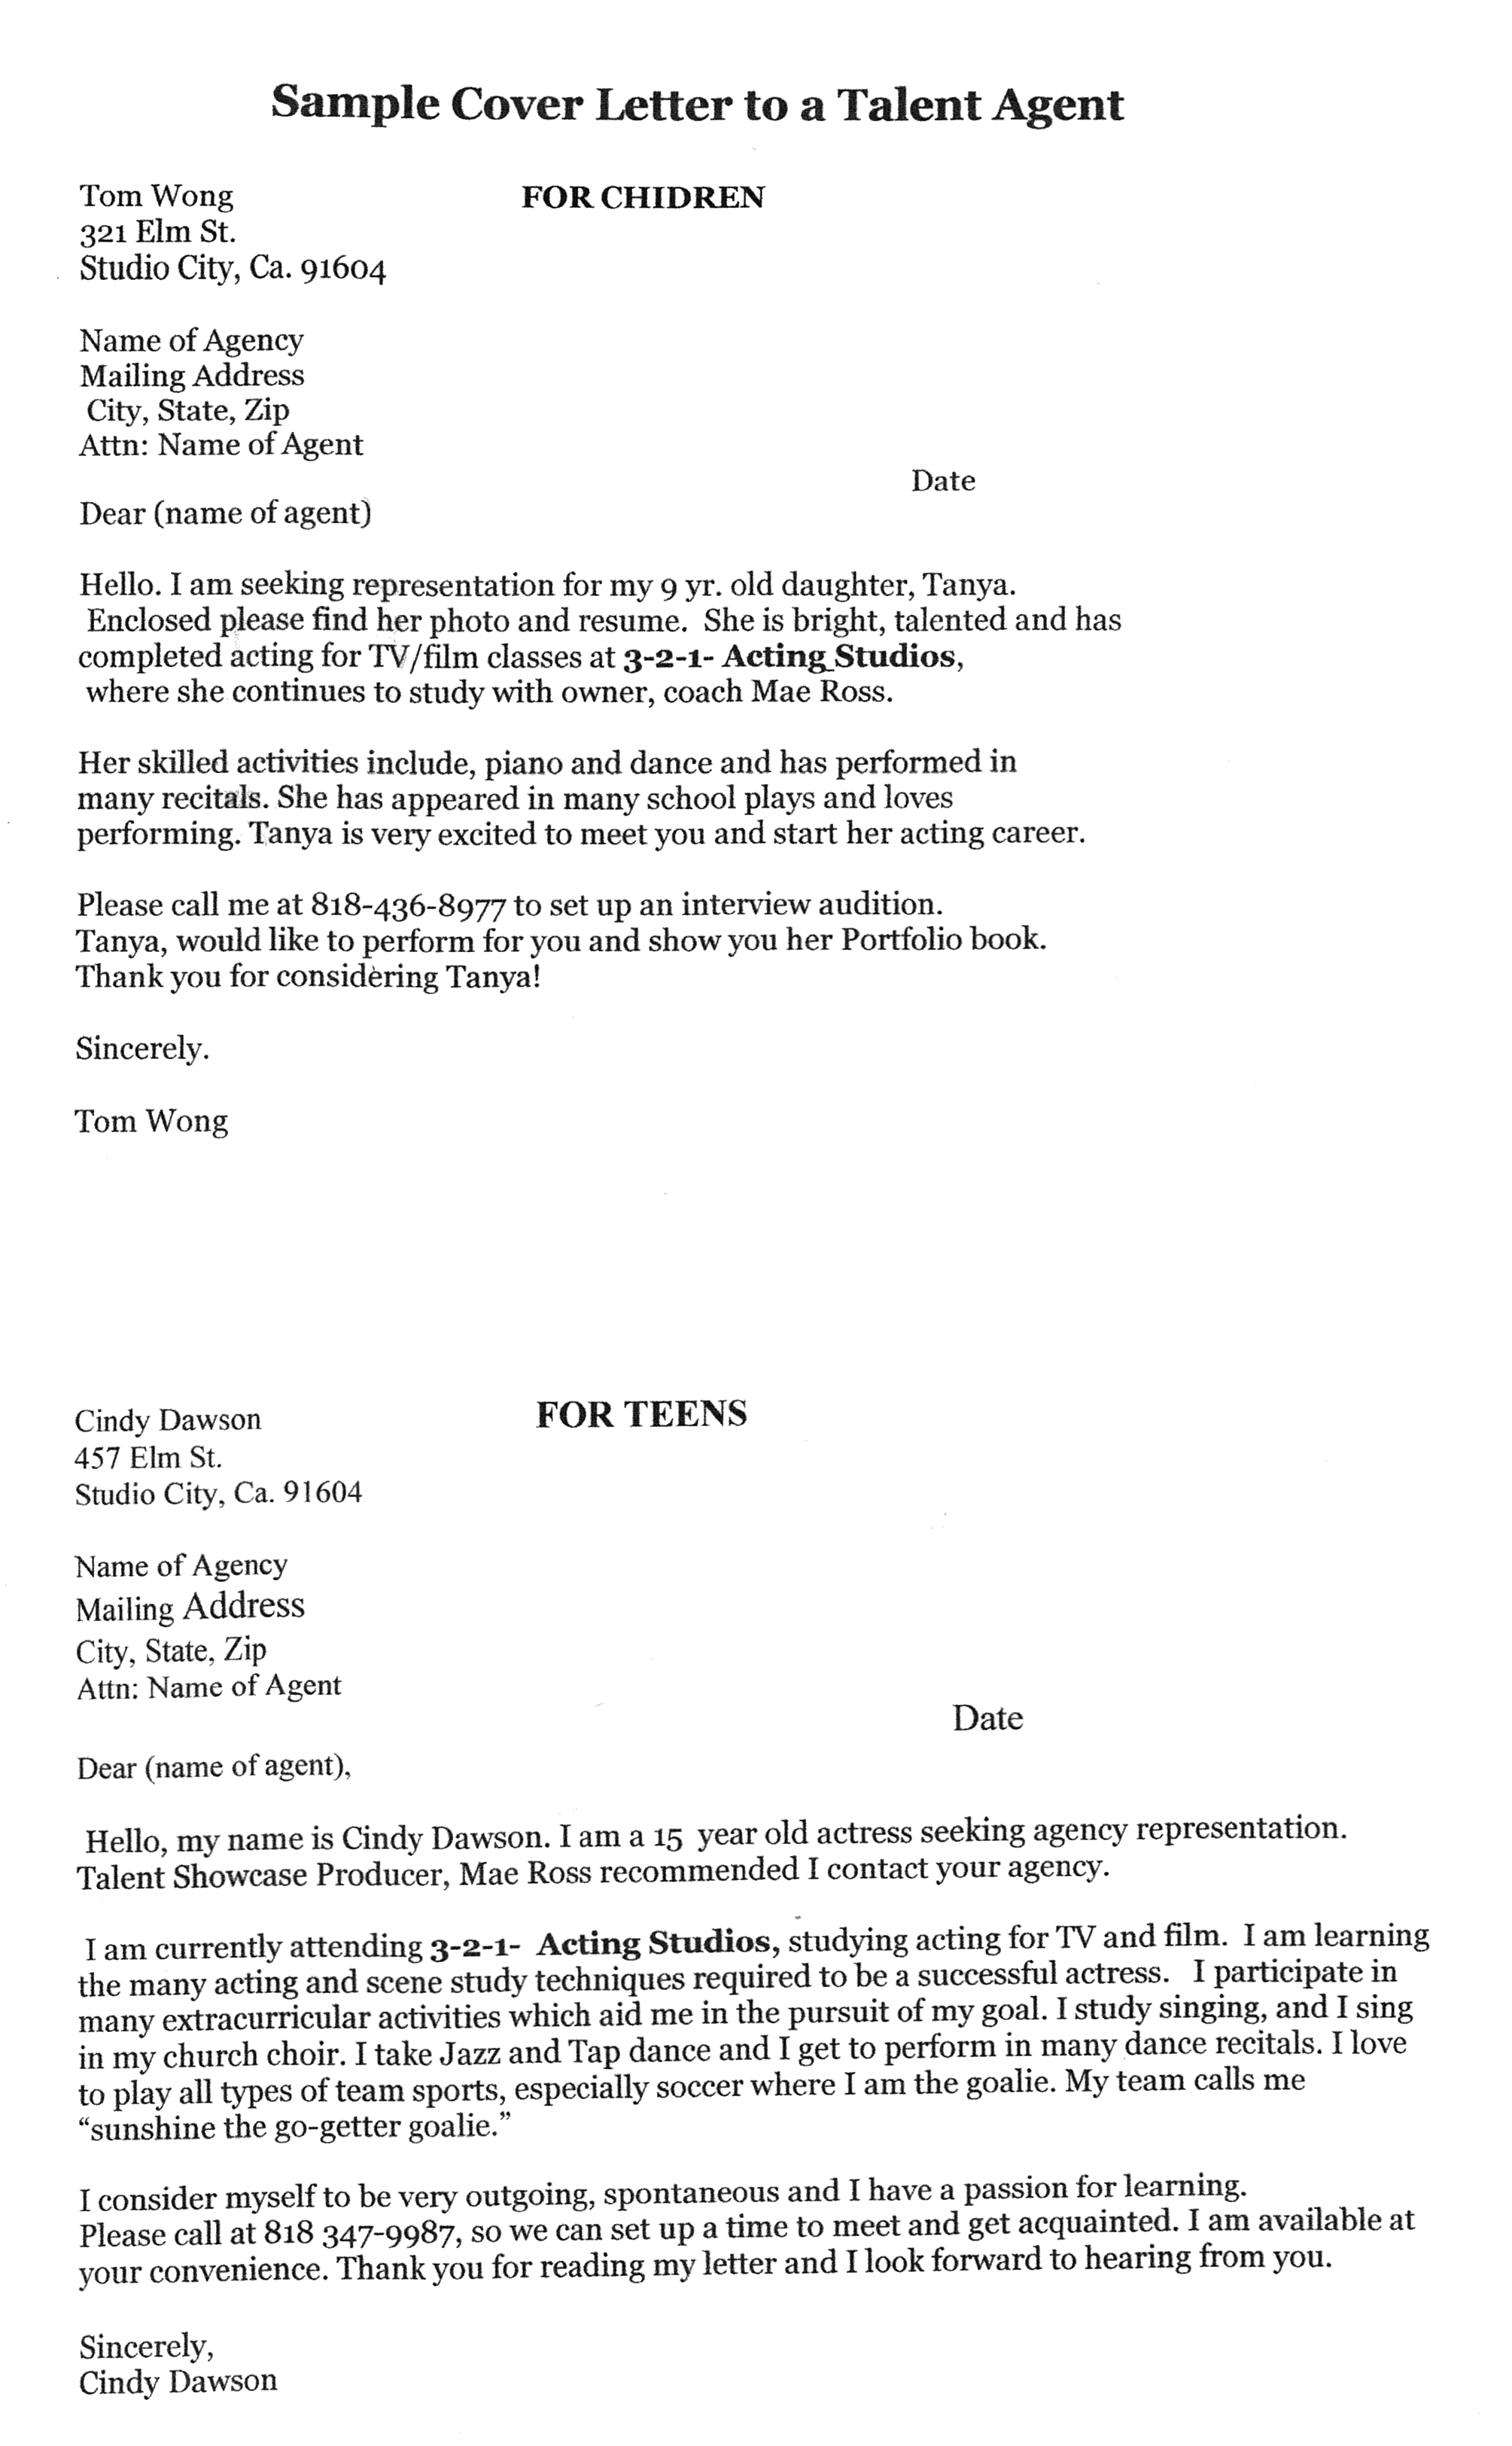 12 steps to writing good actor cover letters to talent agents kid 39 s